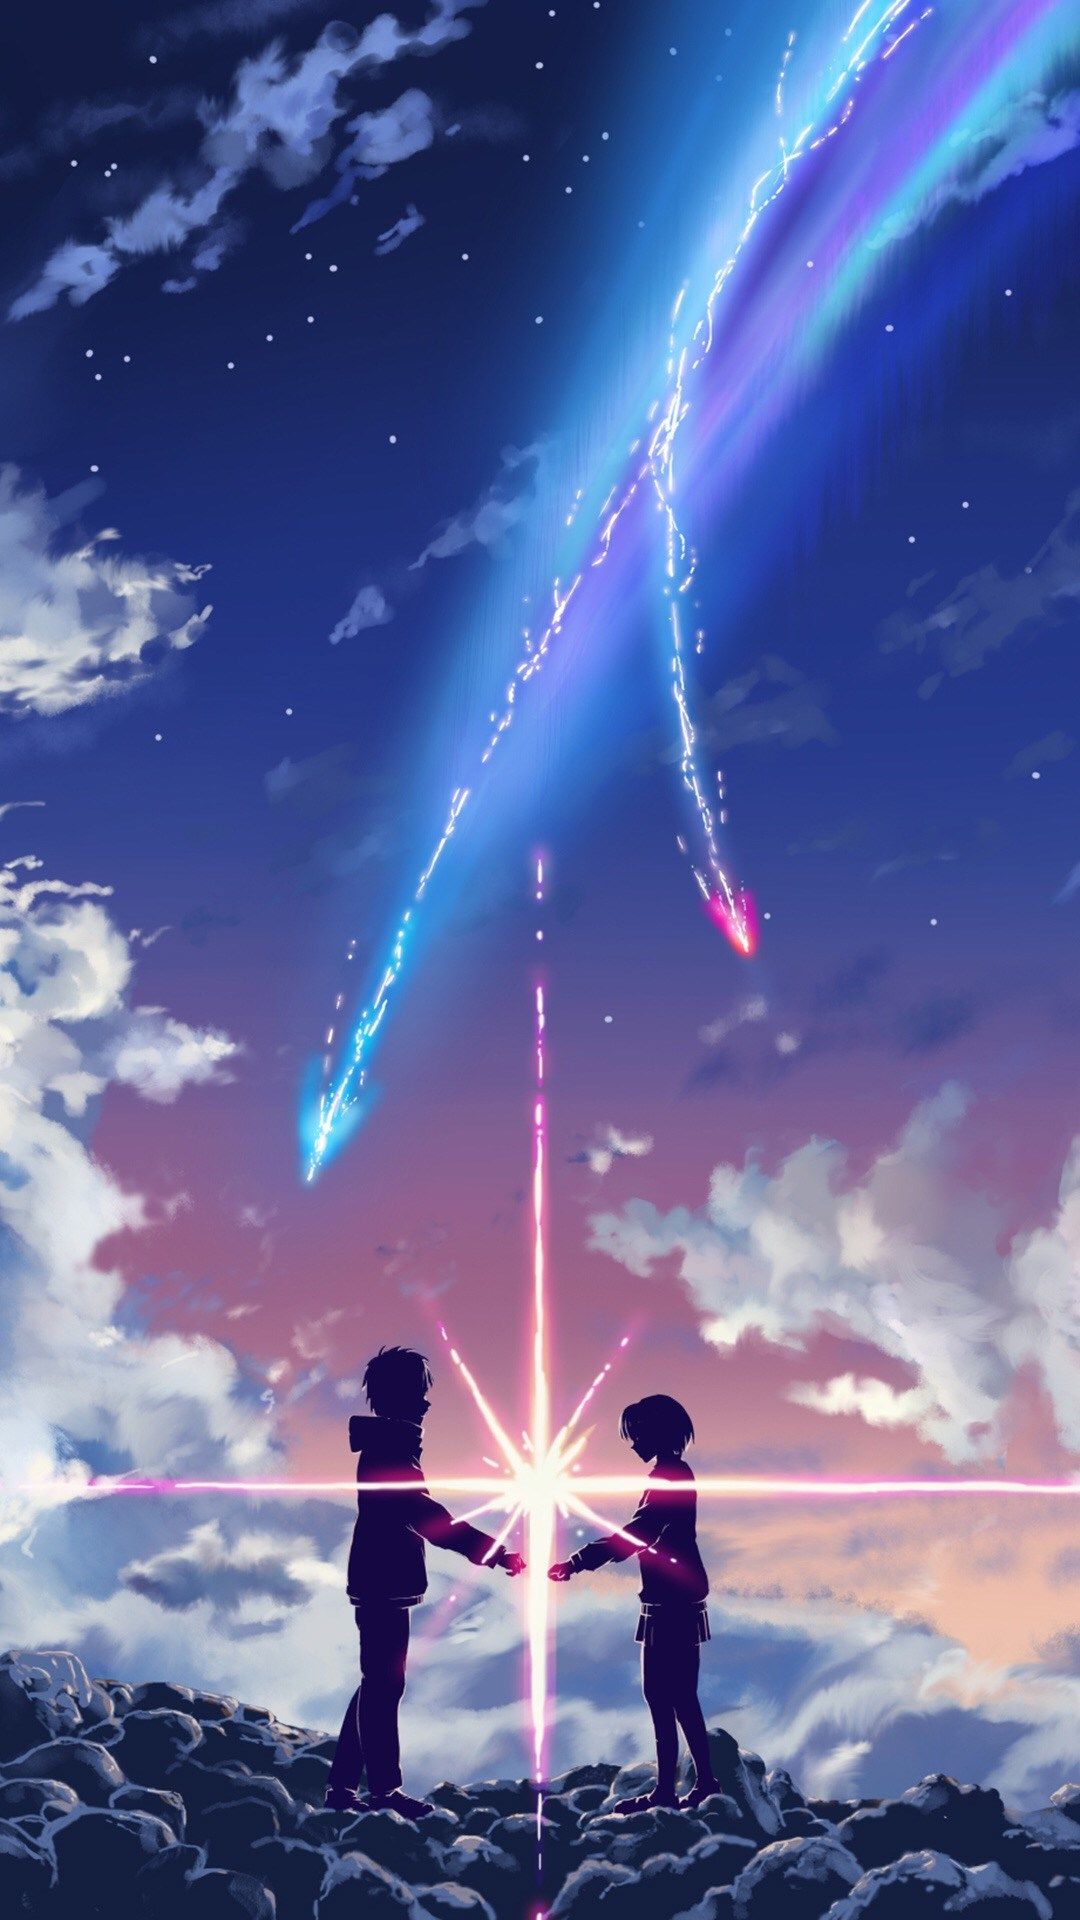 Your Name Movie Touching Through Space Poster #iPhone #wallpaper. Kimi no na wa wallpaper, Your name movie, Your name anime